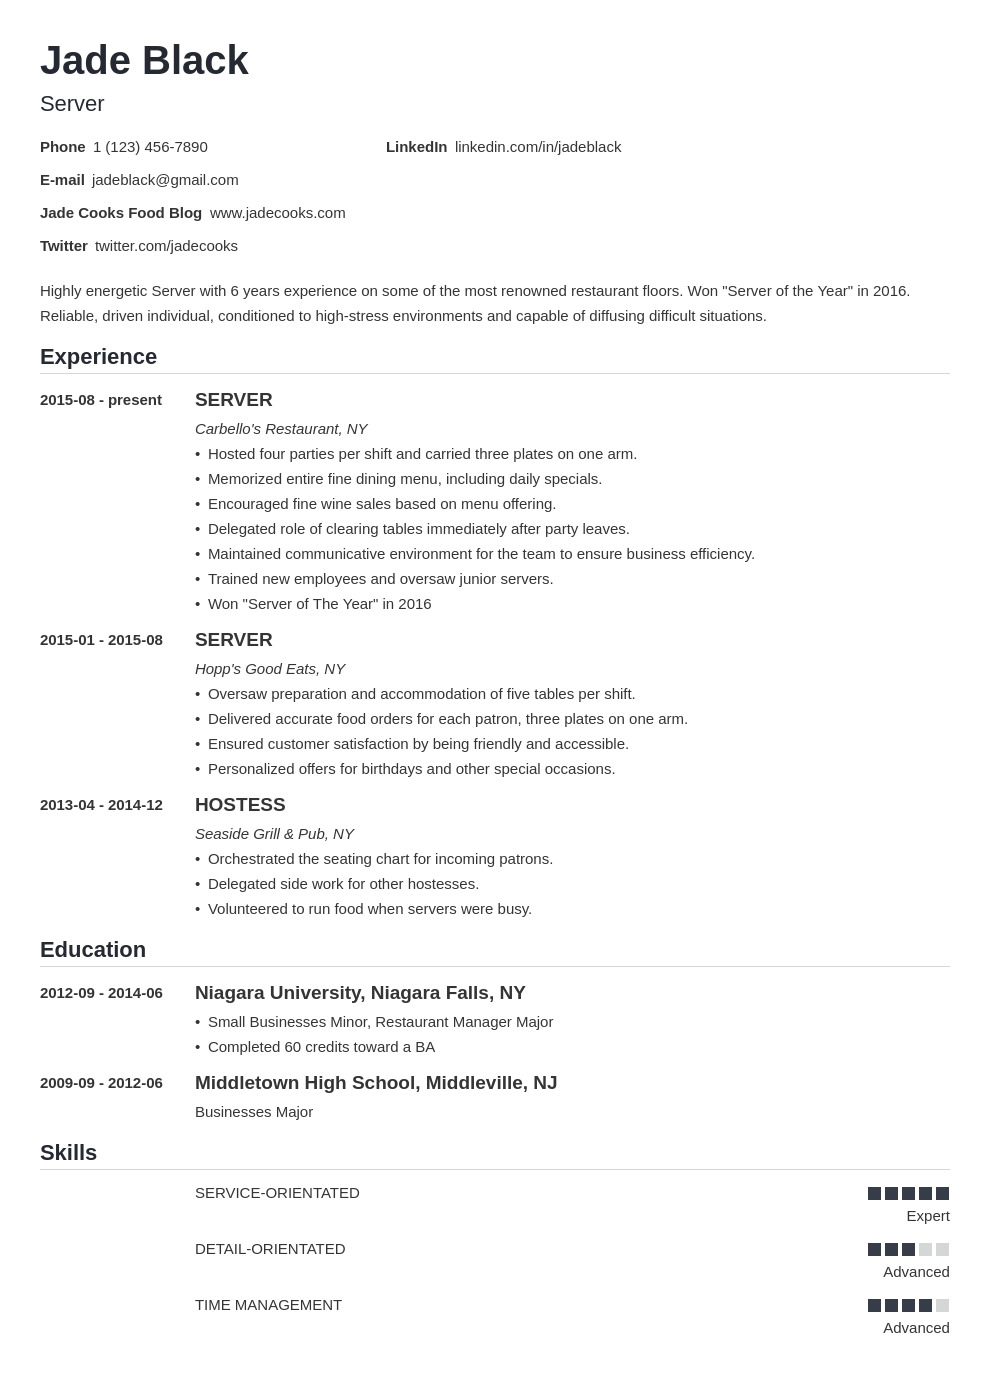 Server Job Description for a Resume: Examples and How-To